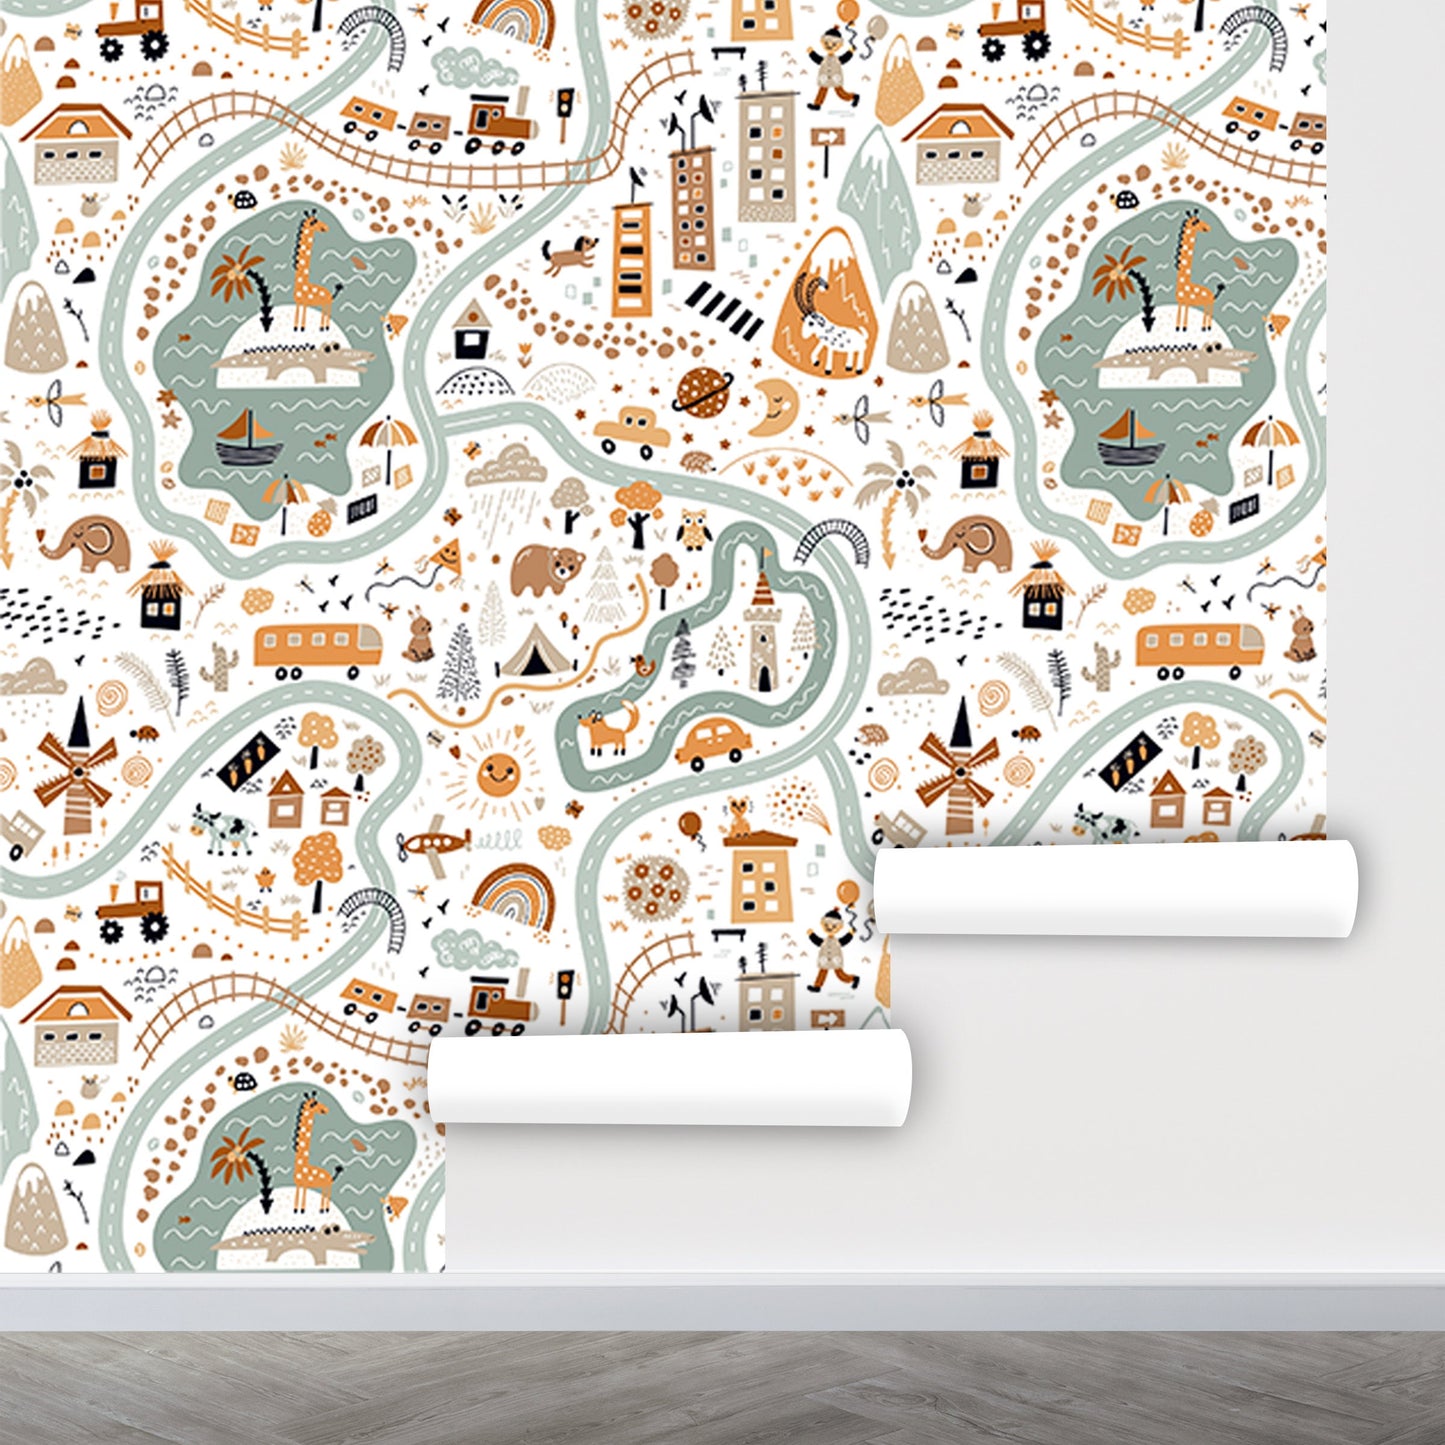 Boys Room Wallpaper Peel and Stick, Village Wallpaper, City Map Wallpaper, Road Wallpaper, Nursery Wallpaper, Removable Wall Paper